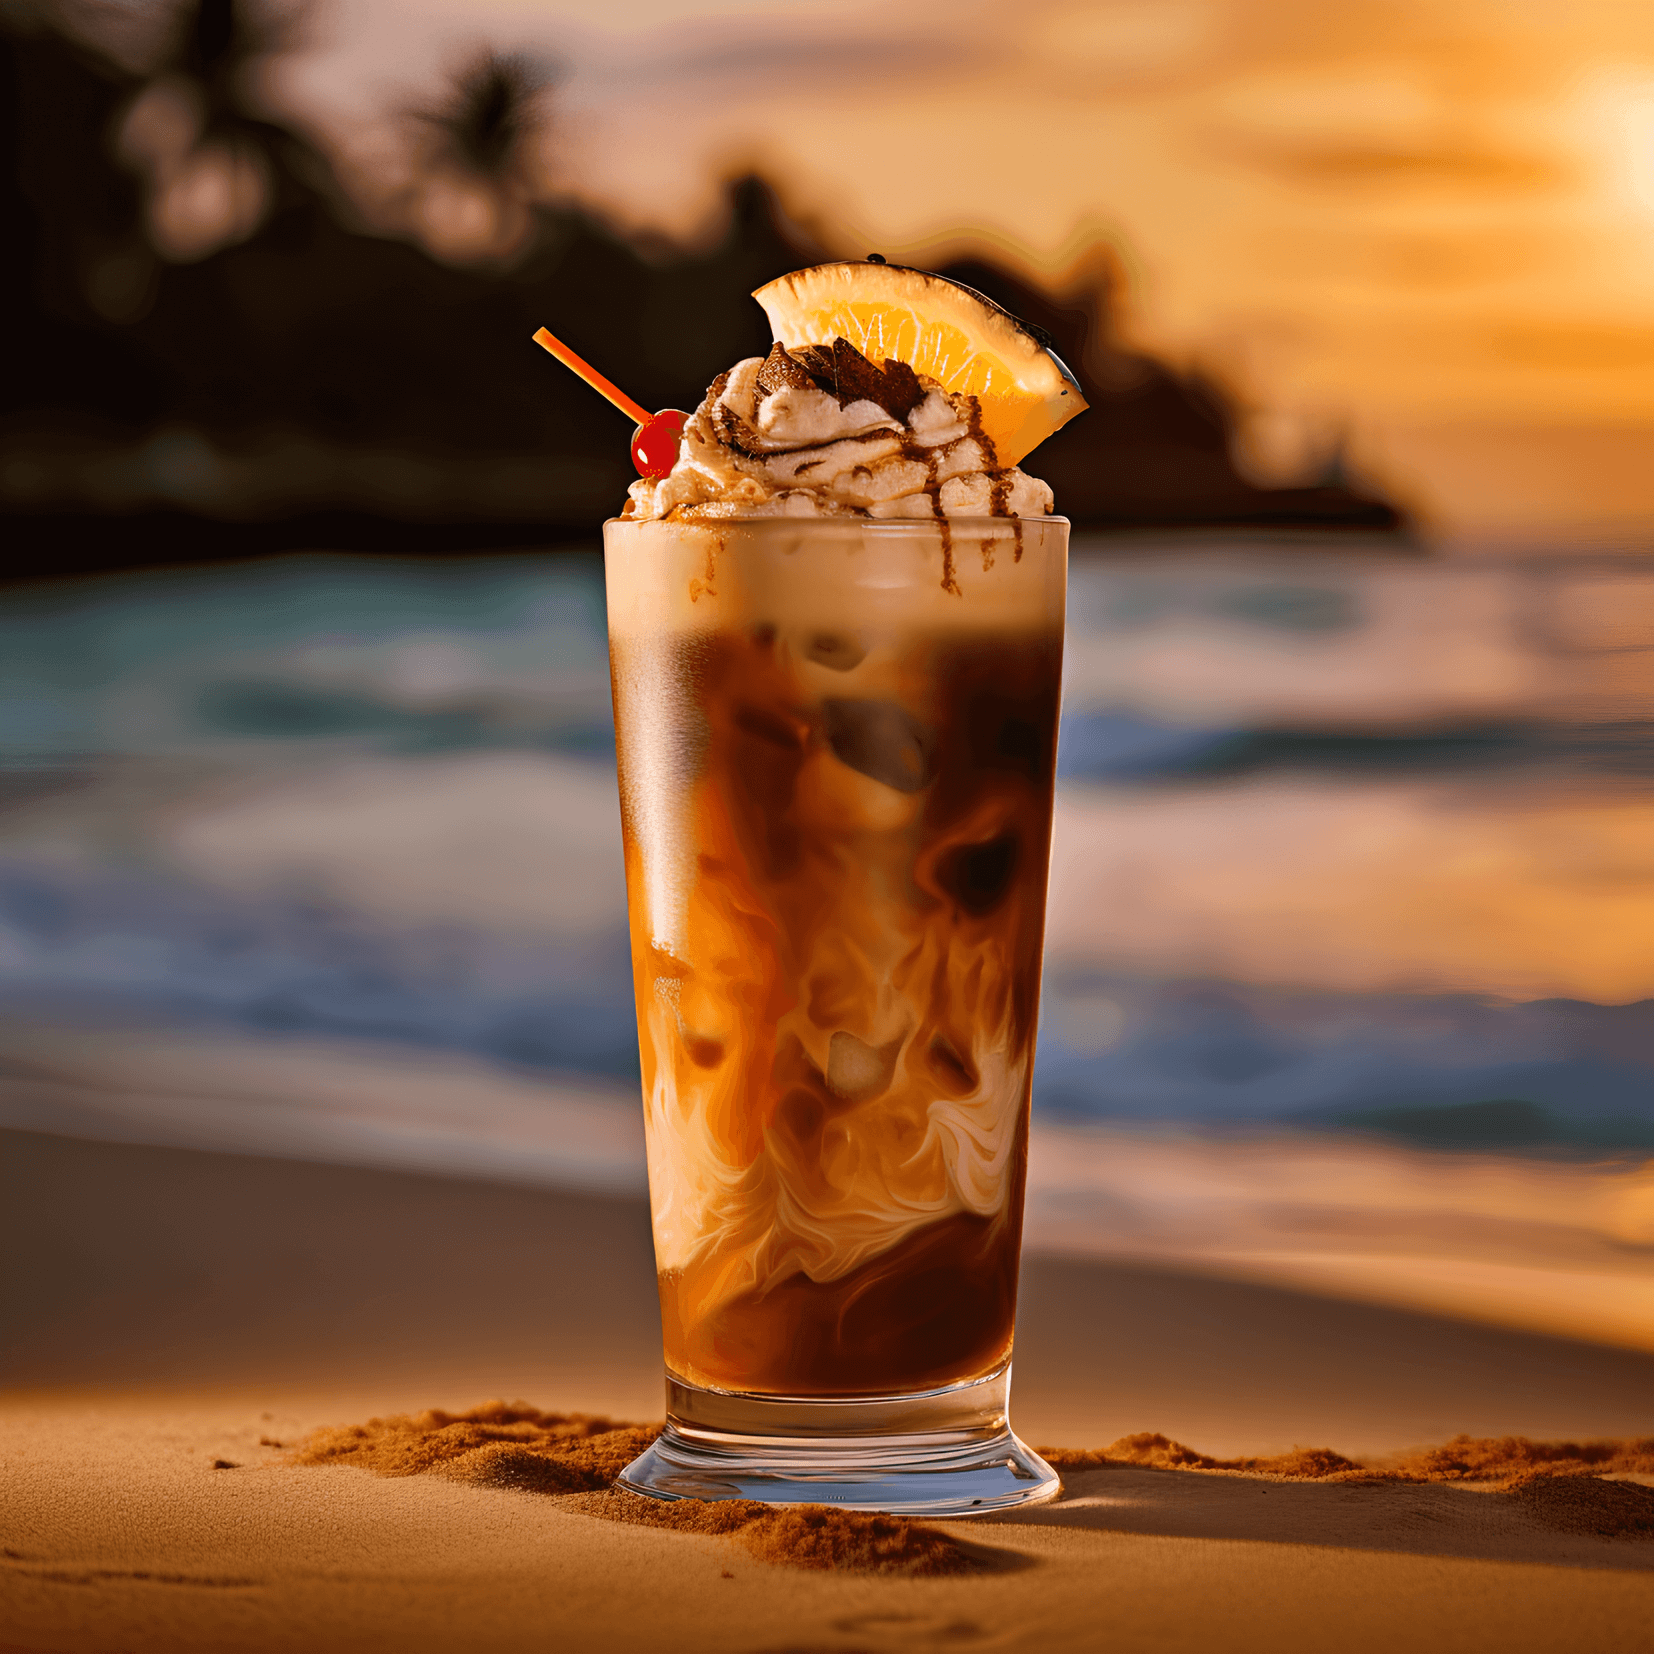 The Bushwacker cocktail is a creamy, rich, and indulgent drink with a velvety texture. It has a sweet, chocolatey taste with hints of coffee and coconut. The rum adds a subtle warmth and depth to the flavor profile.